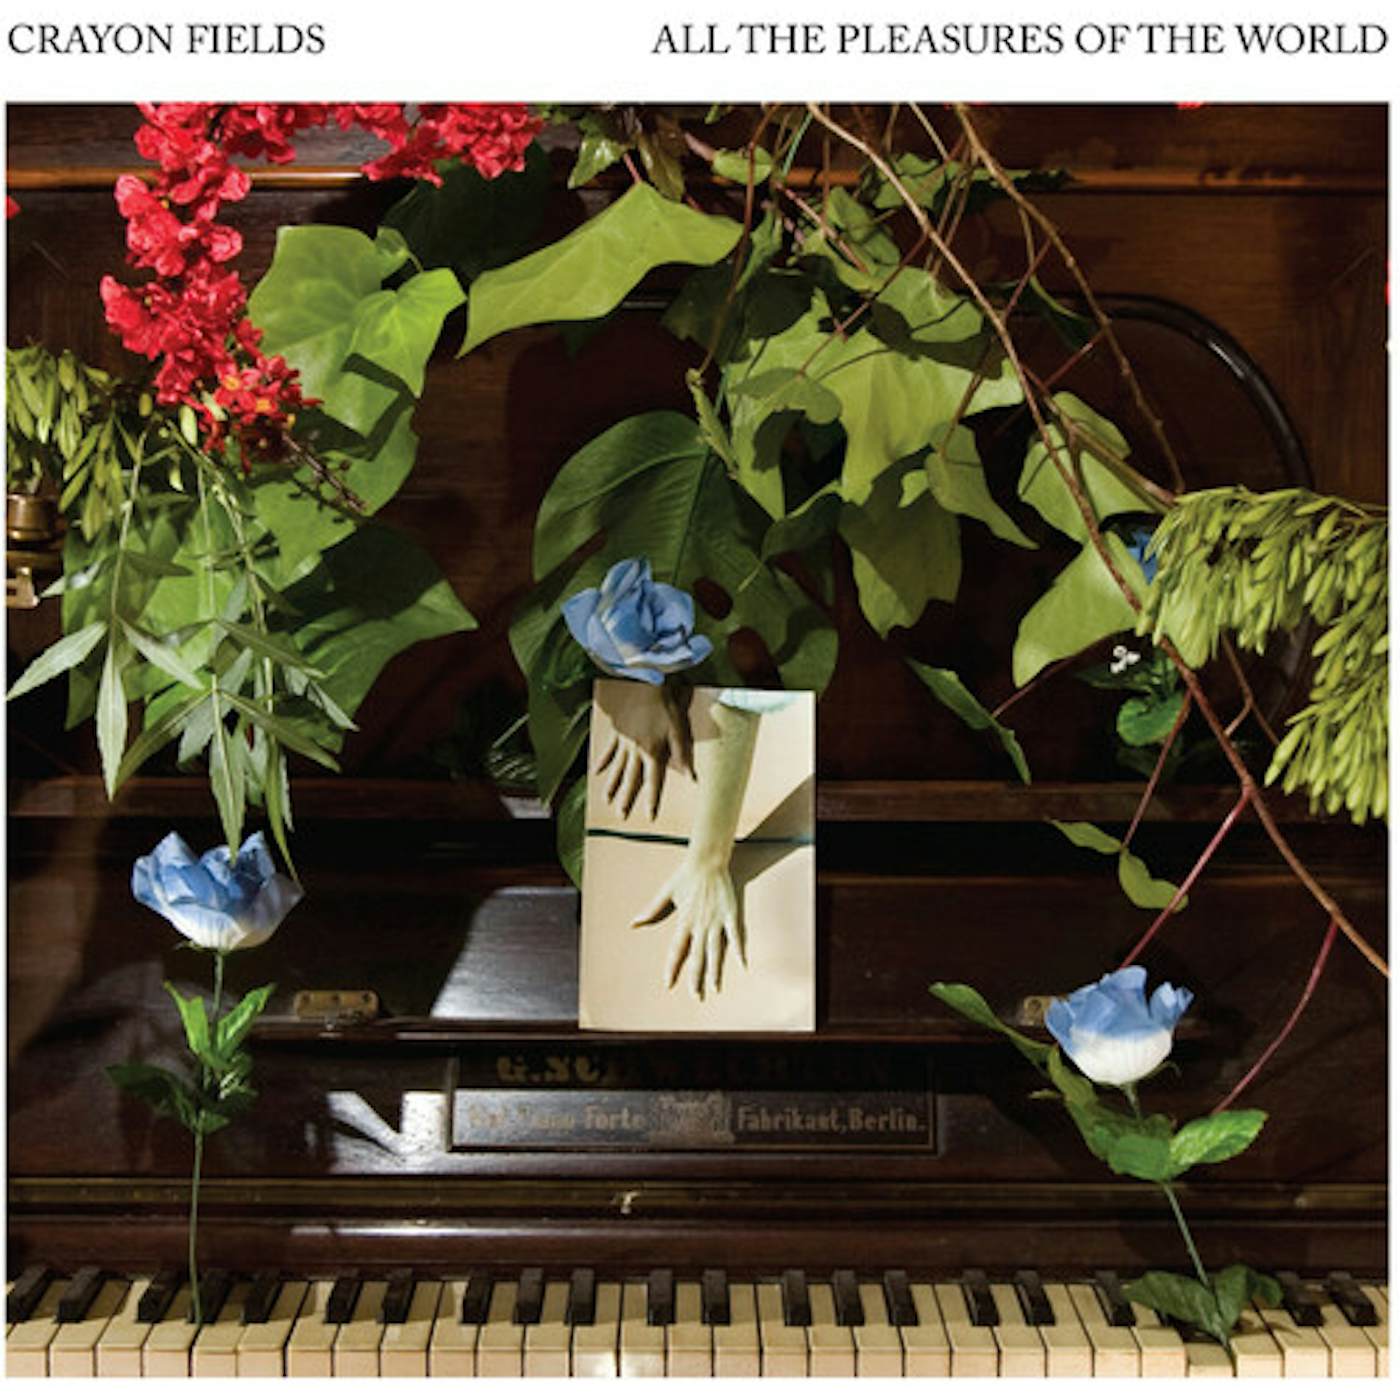 The Crayon Fields ALL THE PLEASURES OF THE WORLD (DELUXE EDITION) (C Vinyl Record